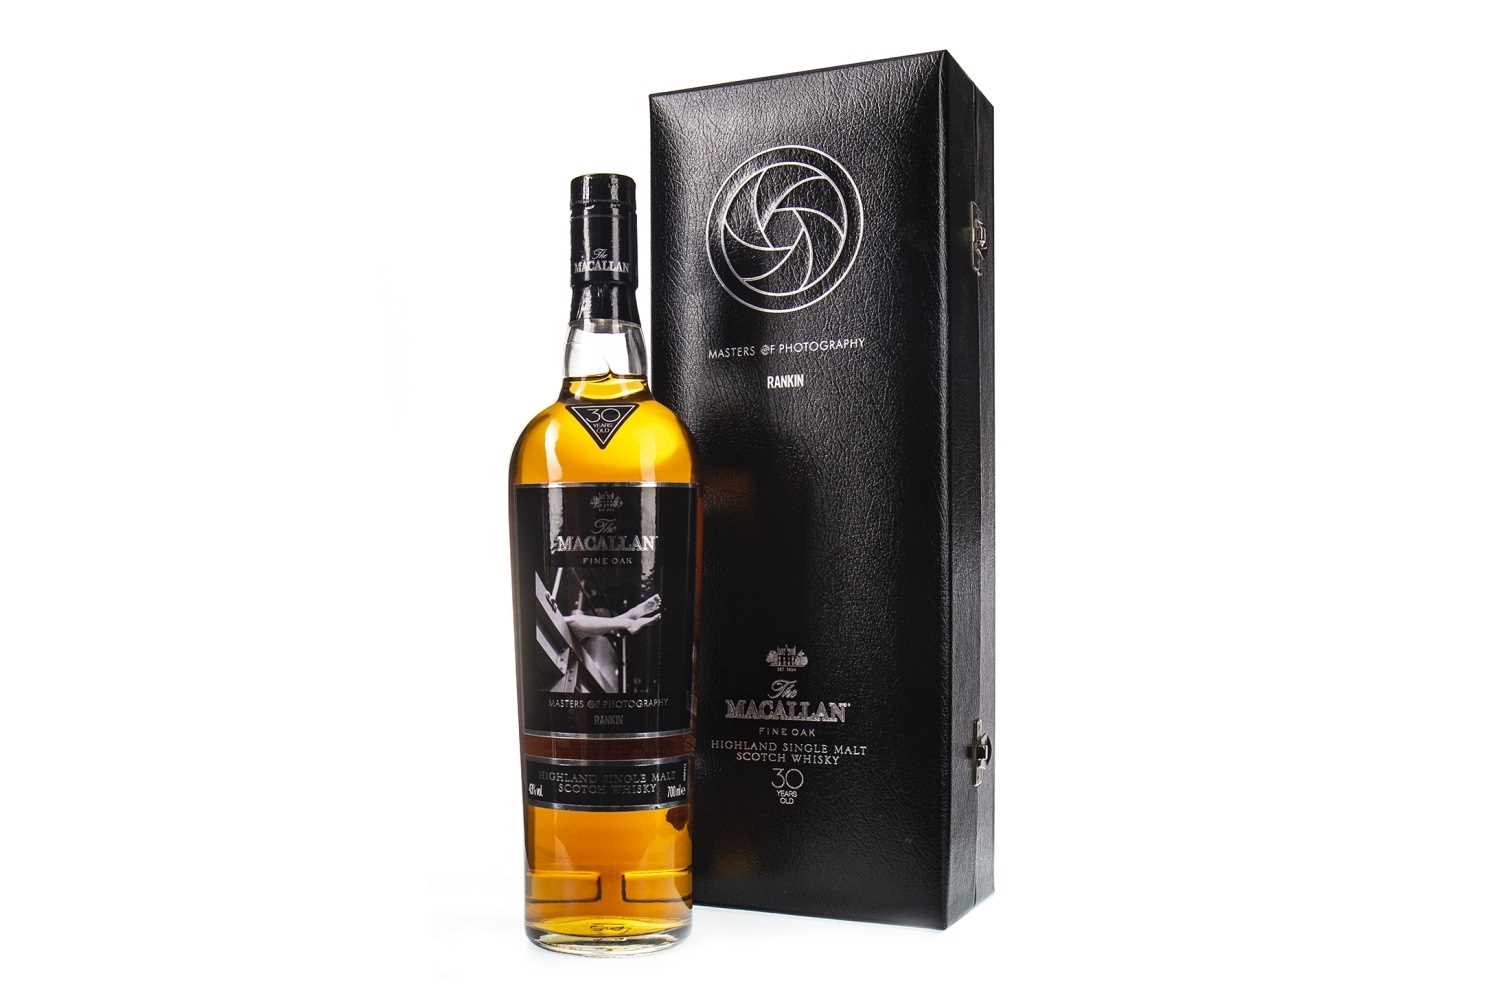 28 - MACALLAN MASTERS OF PHOTOGRAPHY RANKIN AGED 30 YEARS